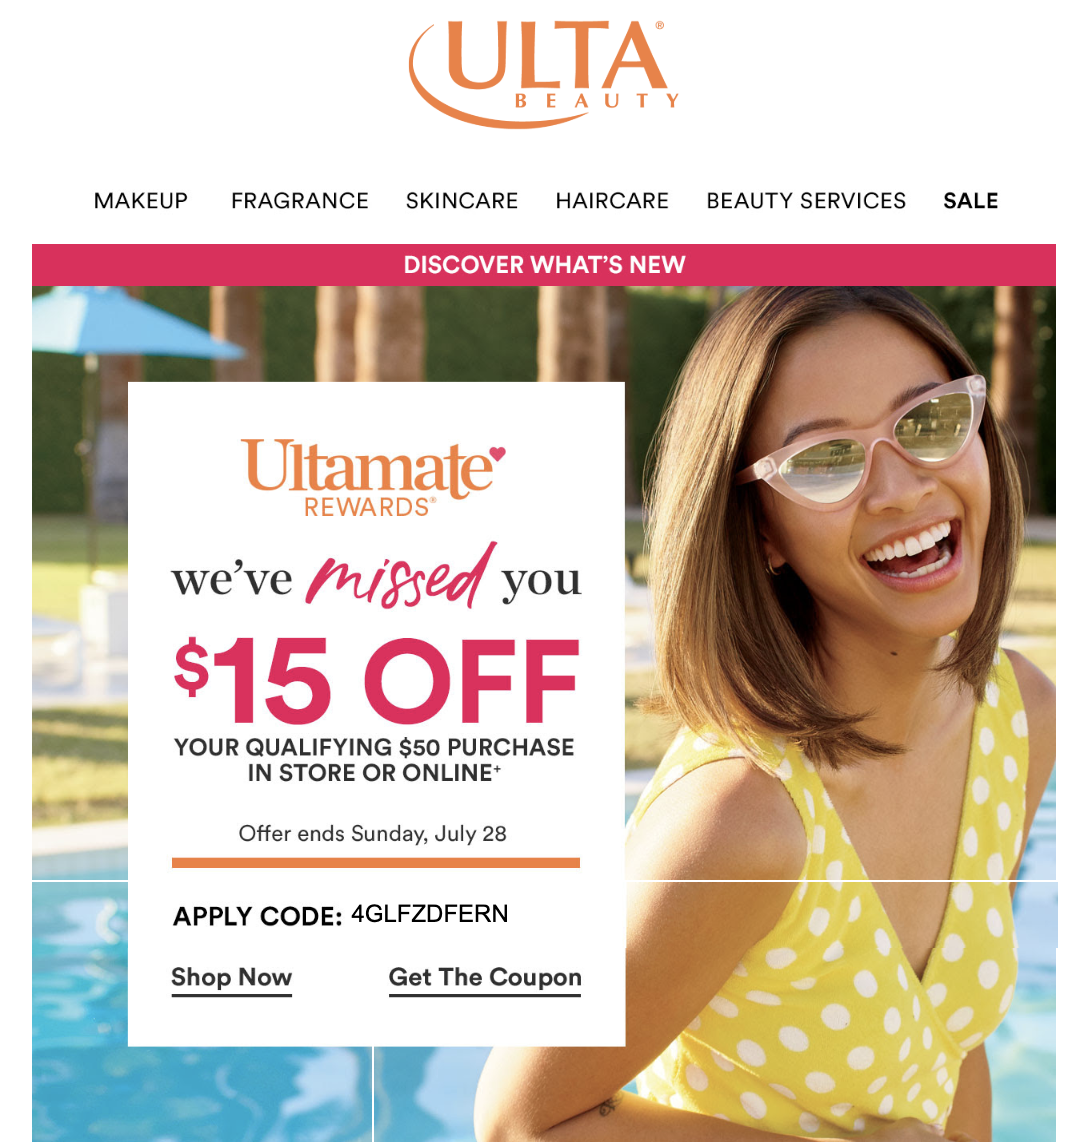 Ulta email for $15 off.